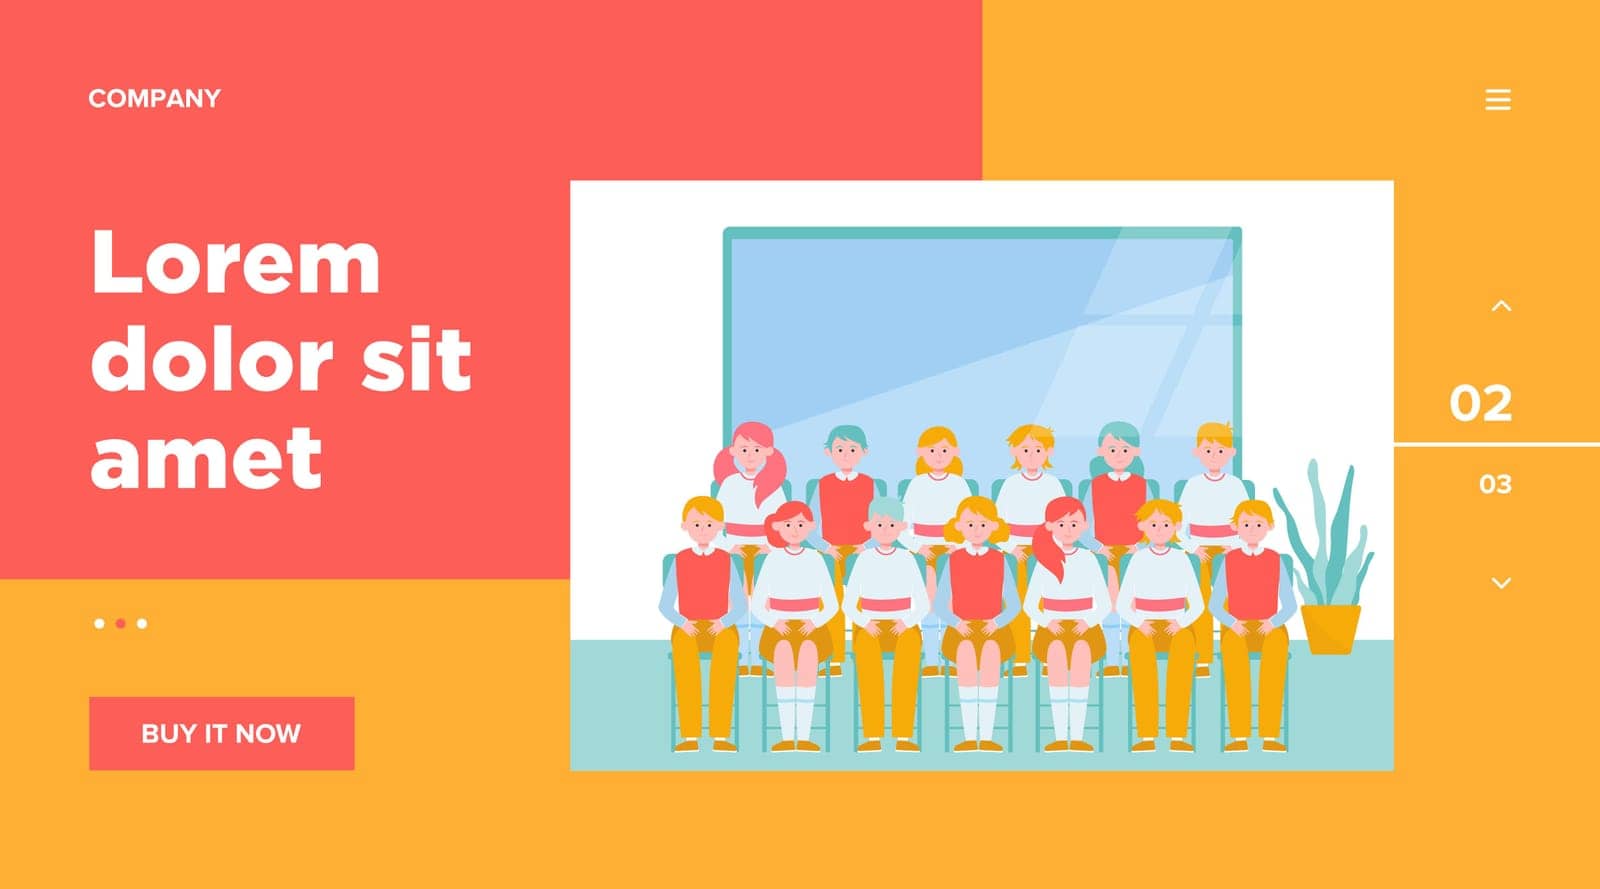 School students posing for class photo in classroom. Teen boys and girls in uniforms sitting in rows near blackboard. Vector illustration for memory, classmates, education concept